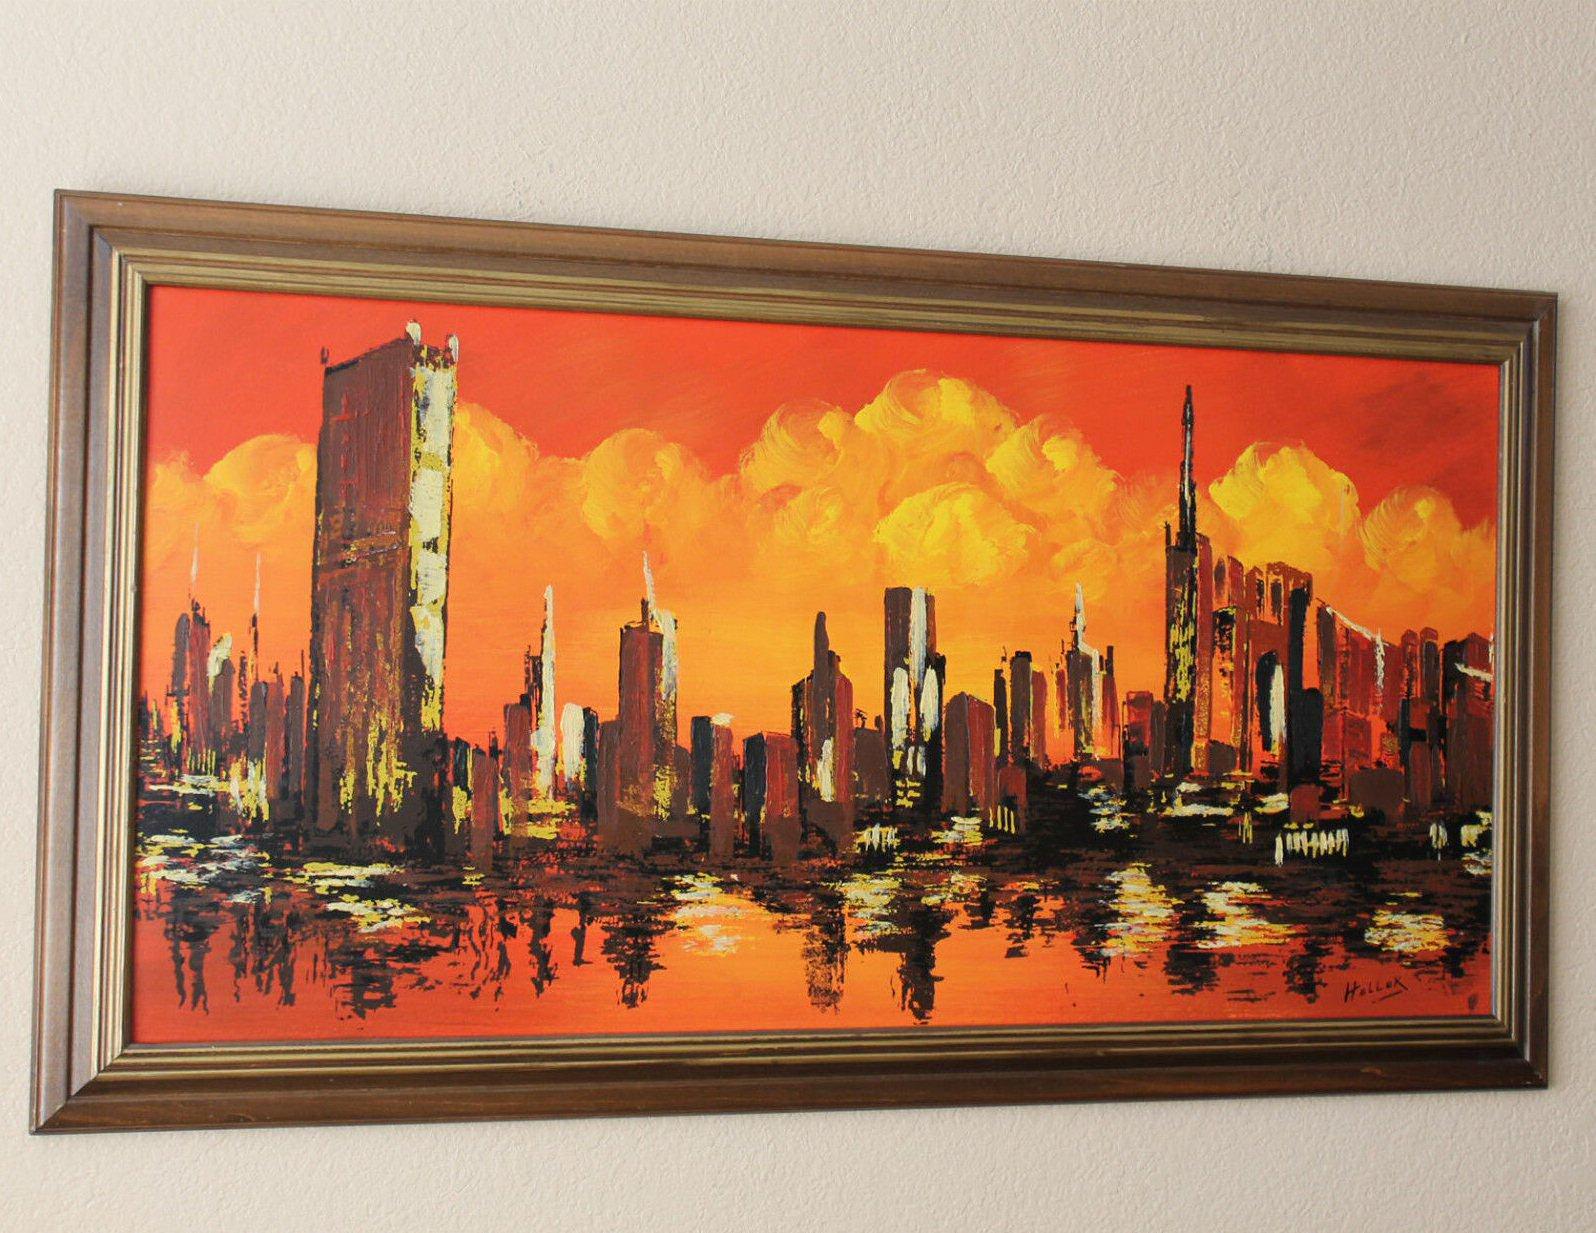 Painted Original Mid Century Cityscape Oil Painting on Board.  1950s Heller MCM Decor For Sale